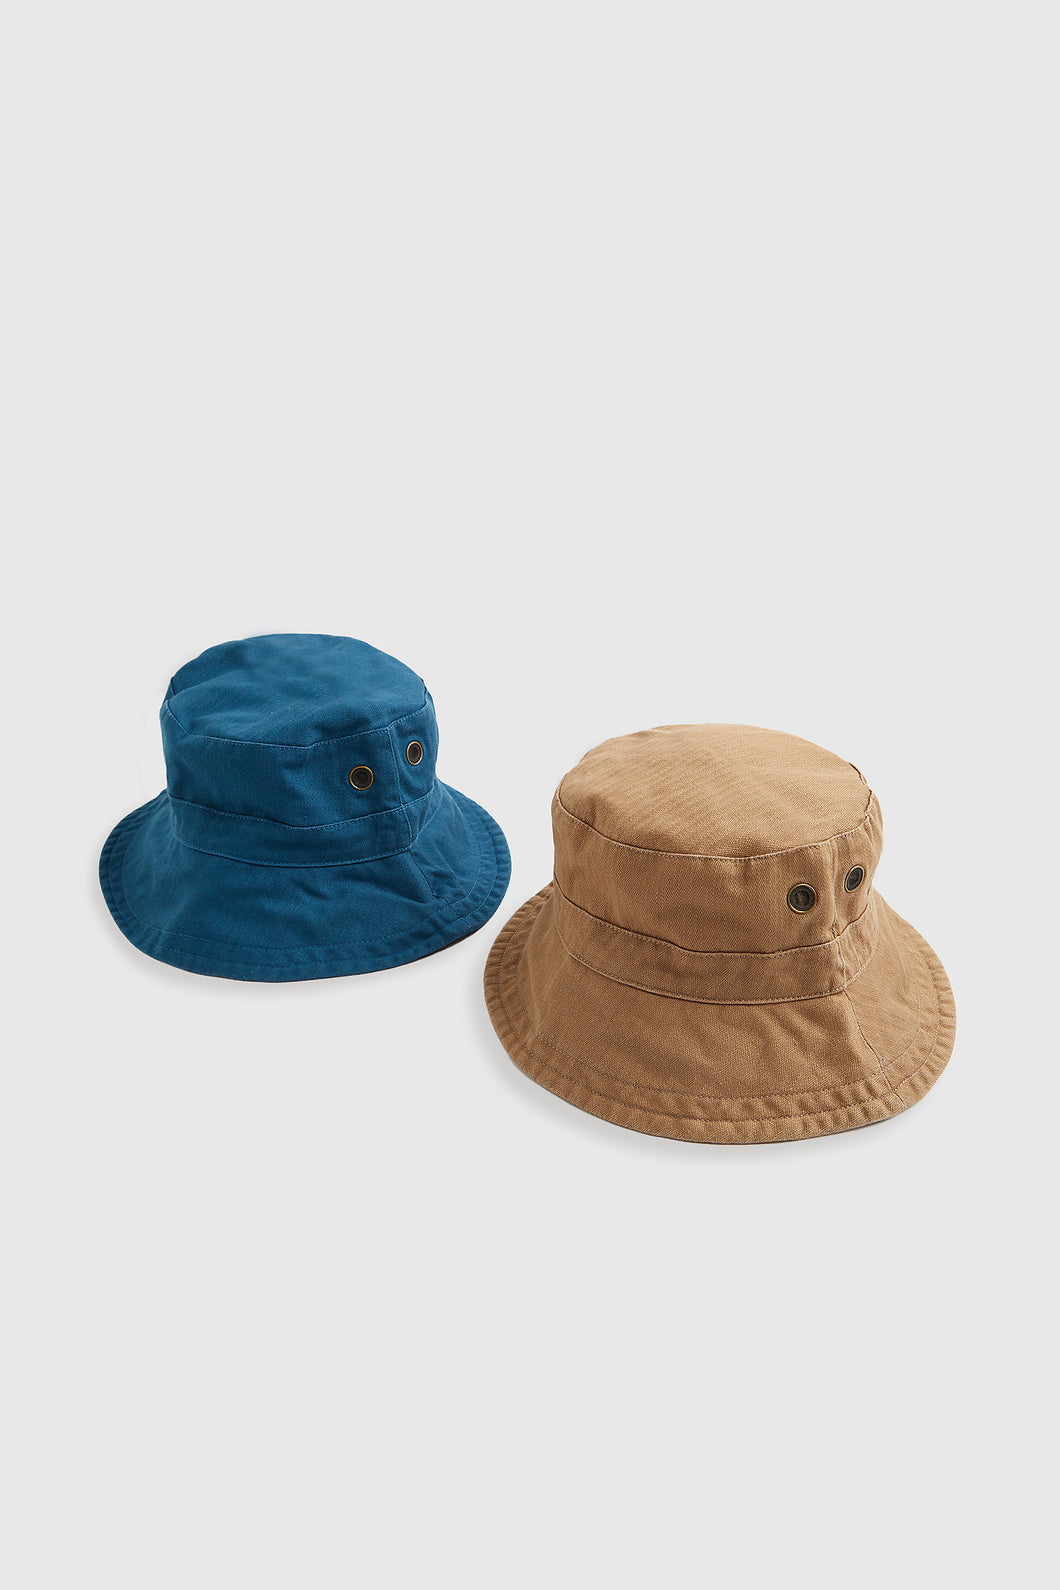 Mothercare Sunsafe Fisherman Hats - 2 Pack